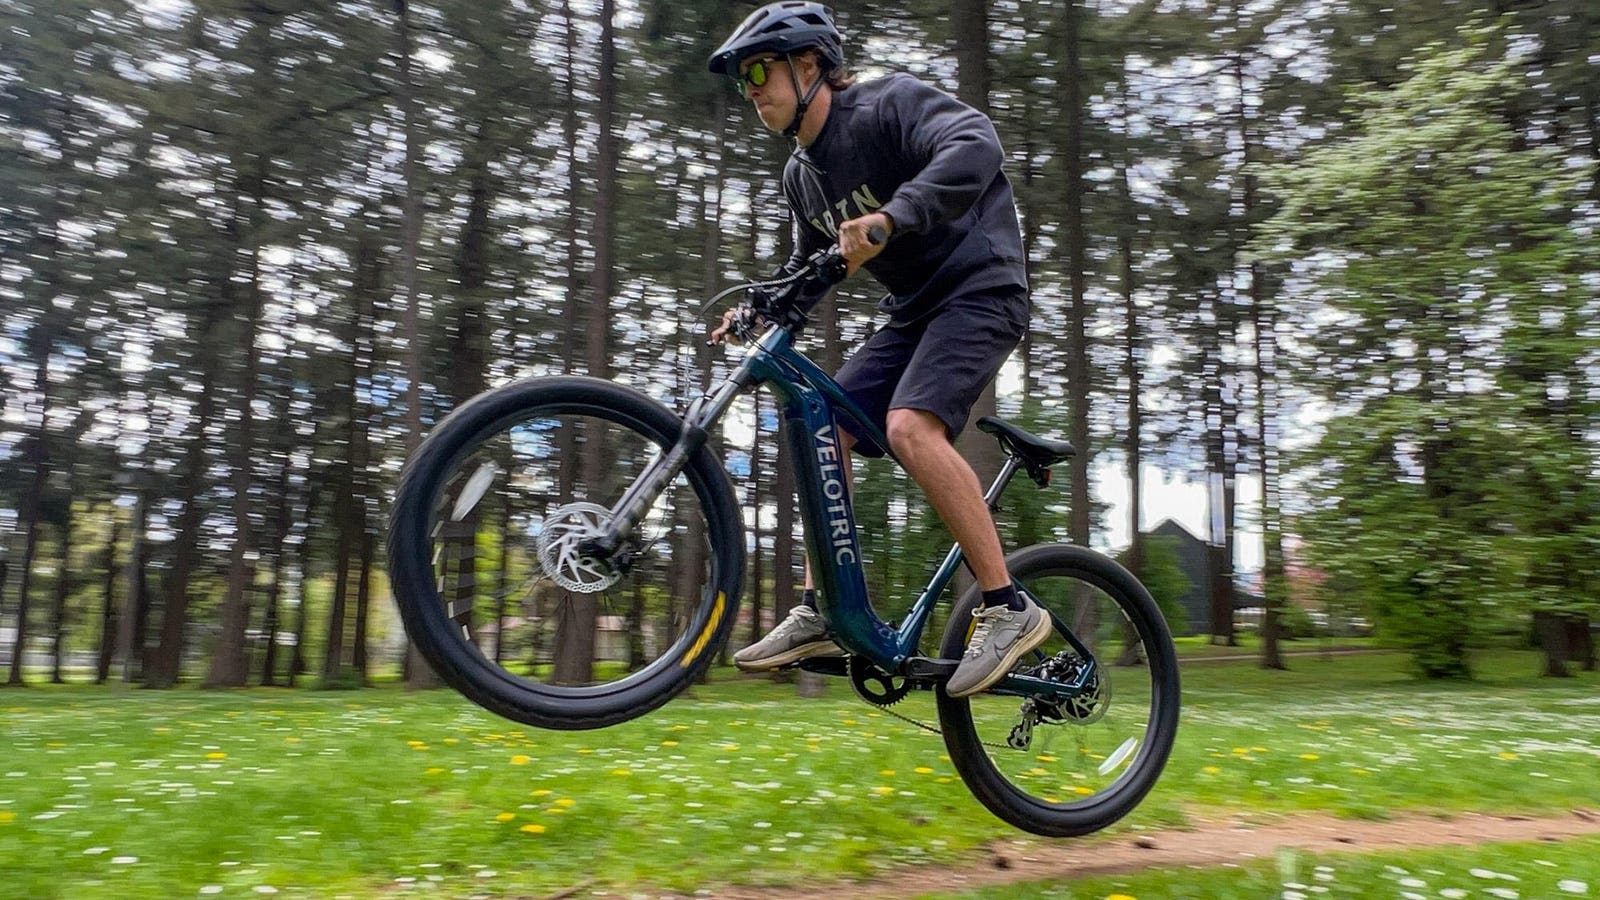 Velotric’s Affordable New Summit 1 Powers Up E-Mountain Biking